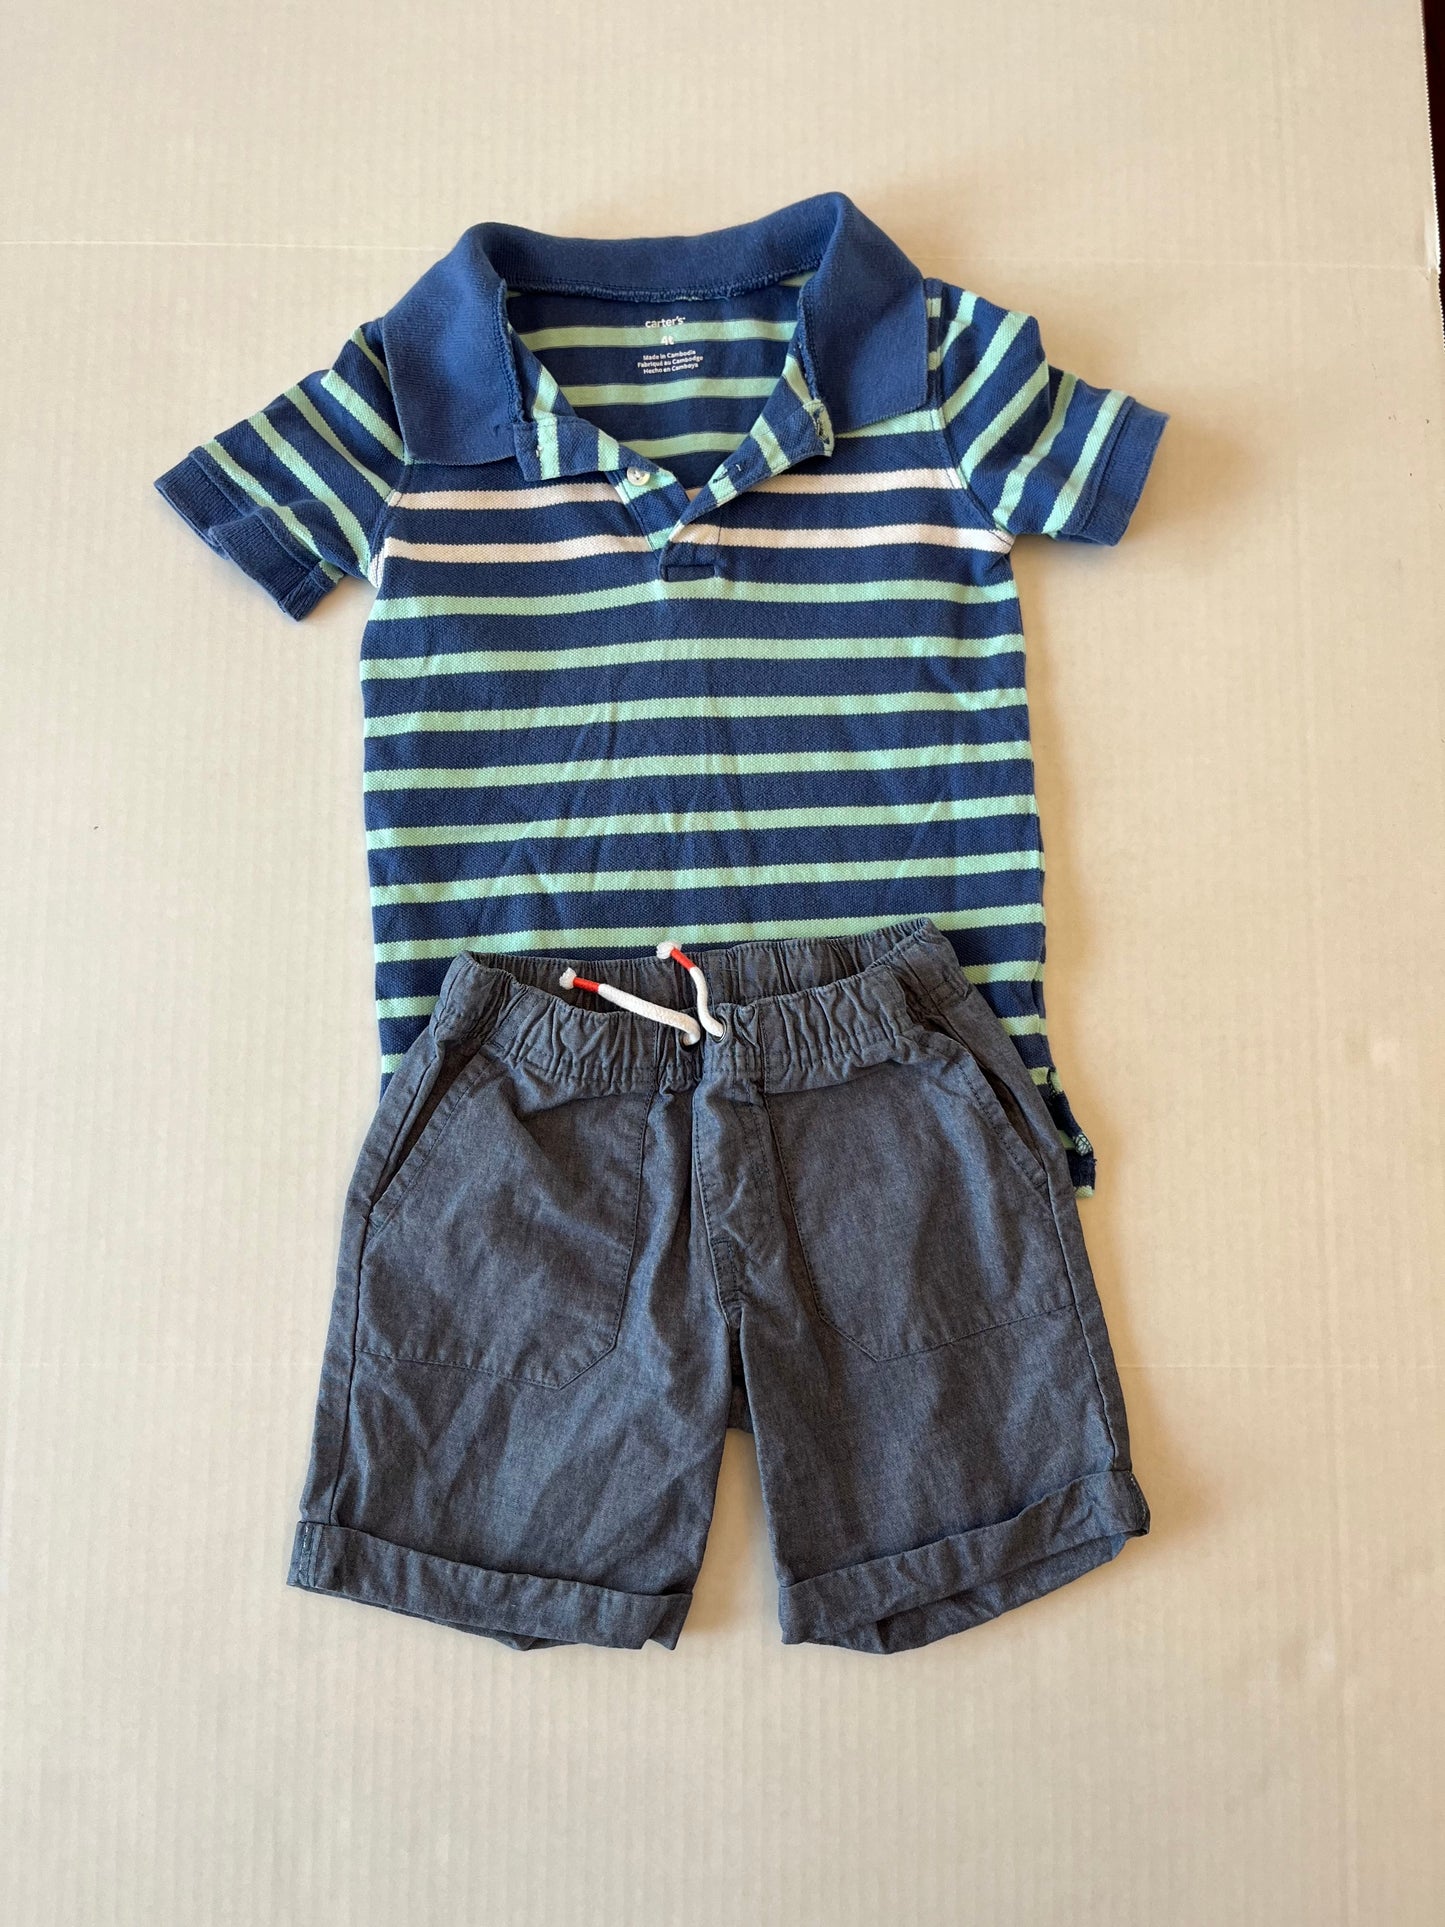 Carter’s golf shirt and cat and Jack shorts size 4T PPU Mariemont